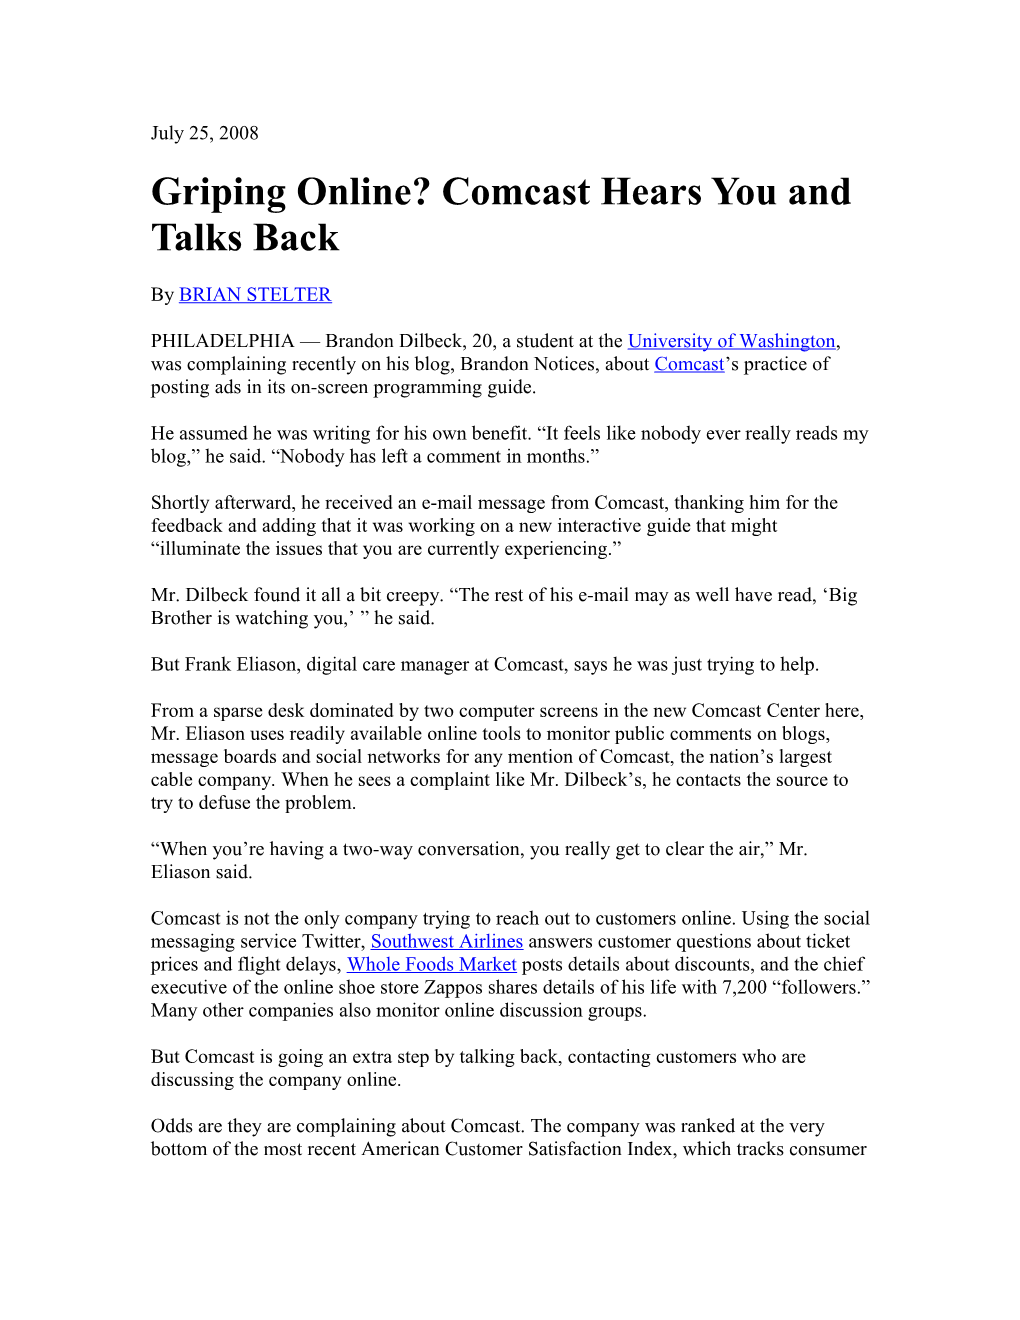 Griping Online? Comcast Hears You and Talks Back